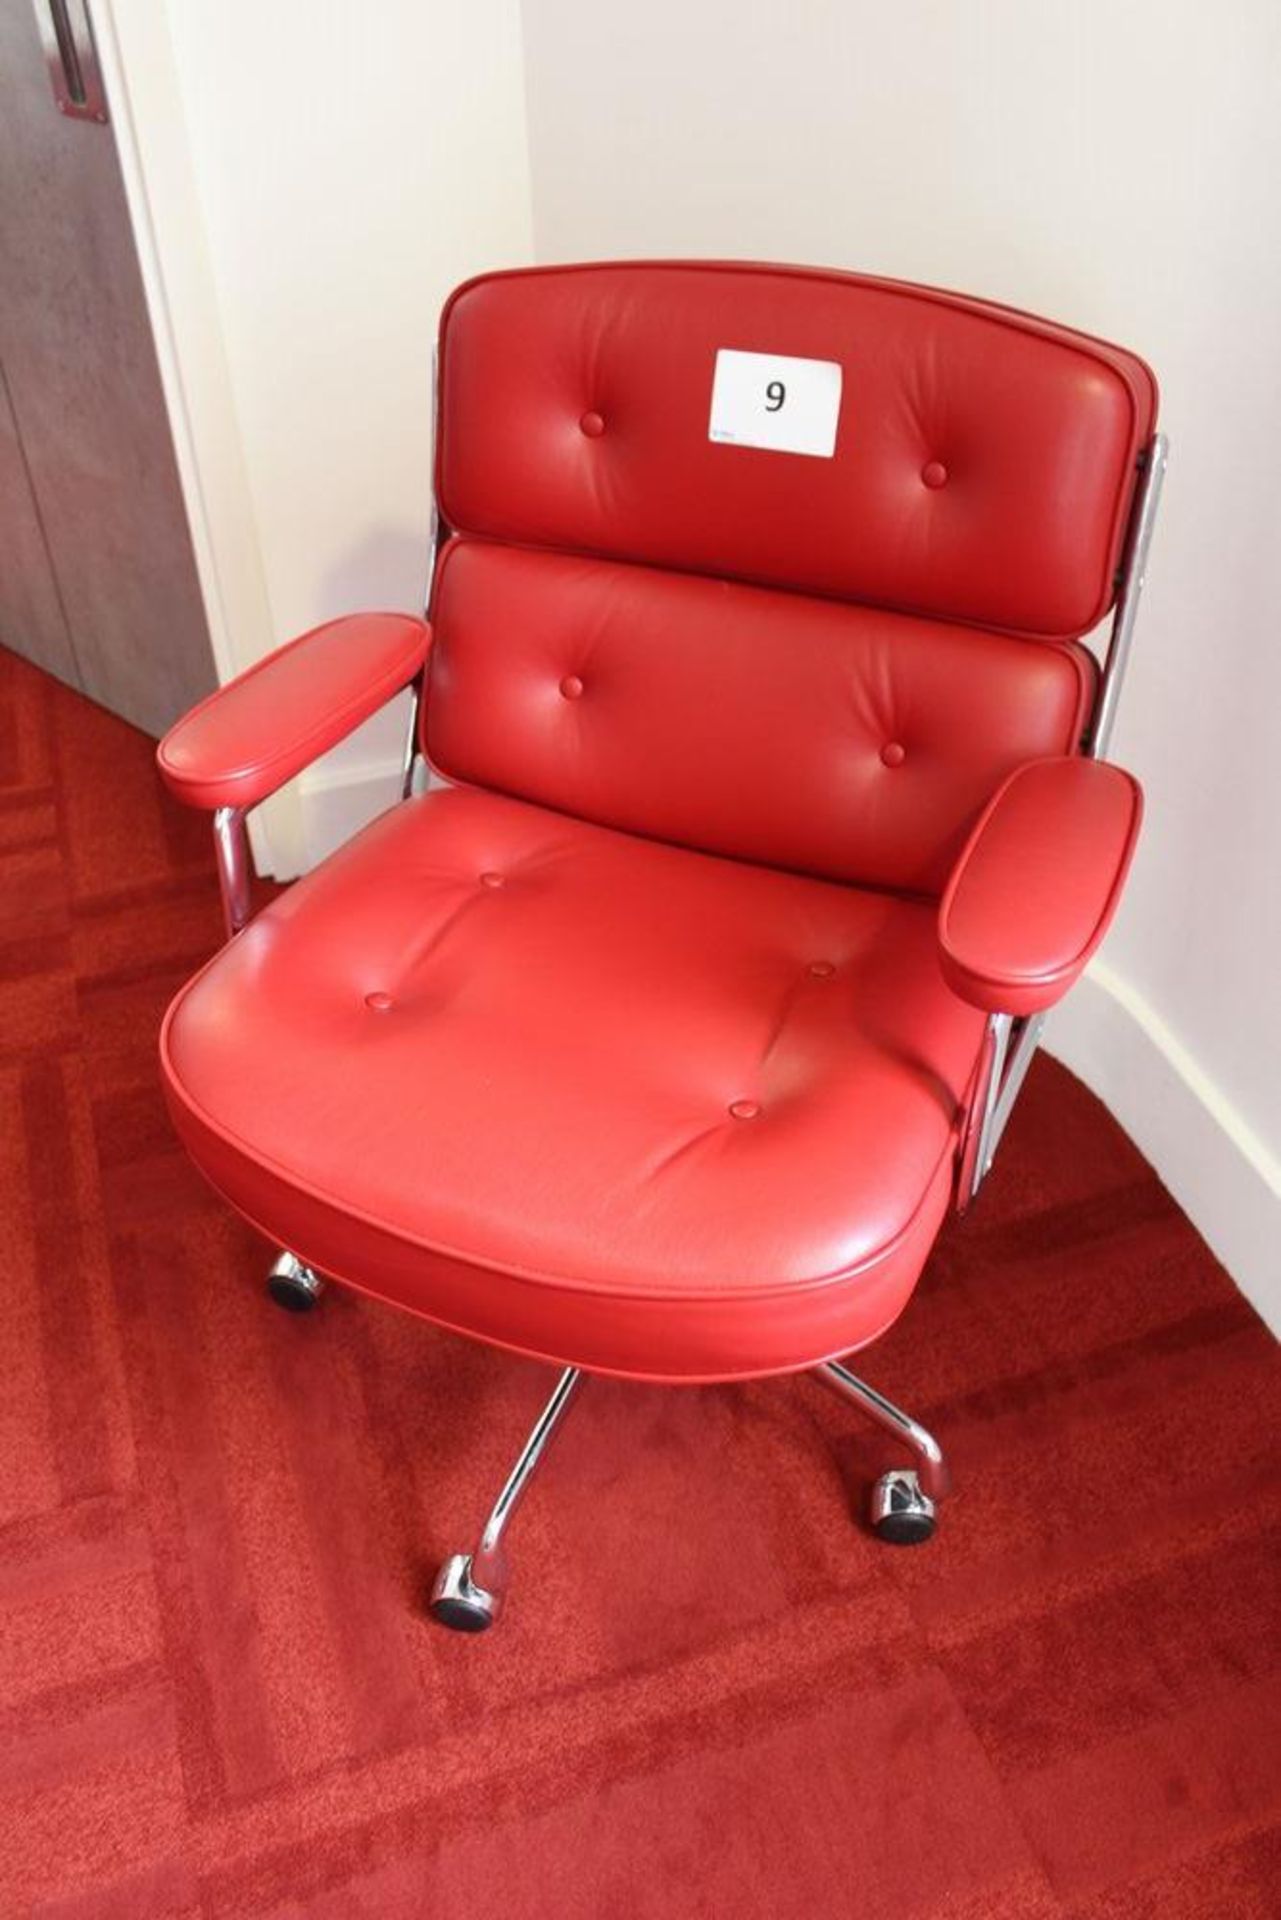 Vitra Eames Red Leather Lobby Chair